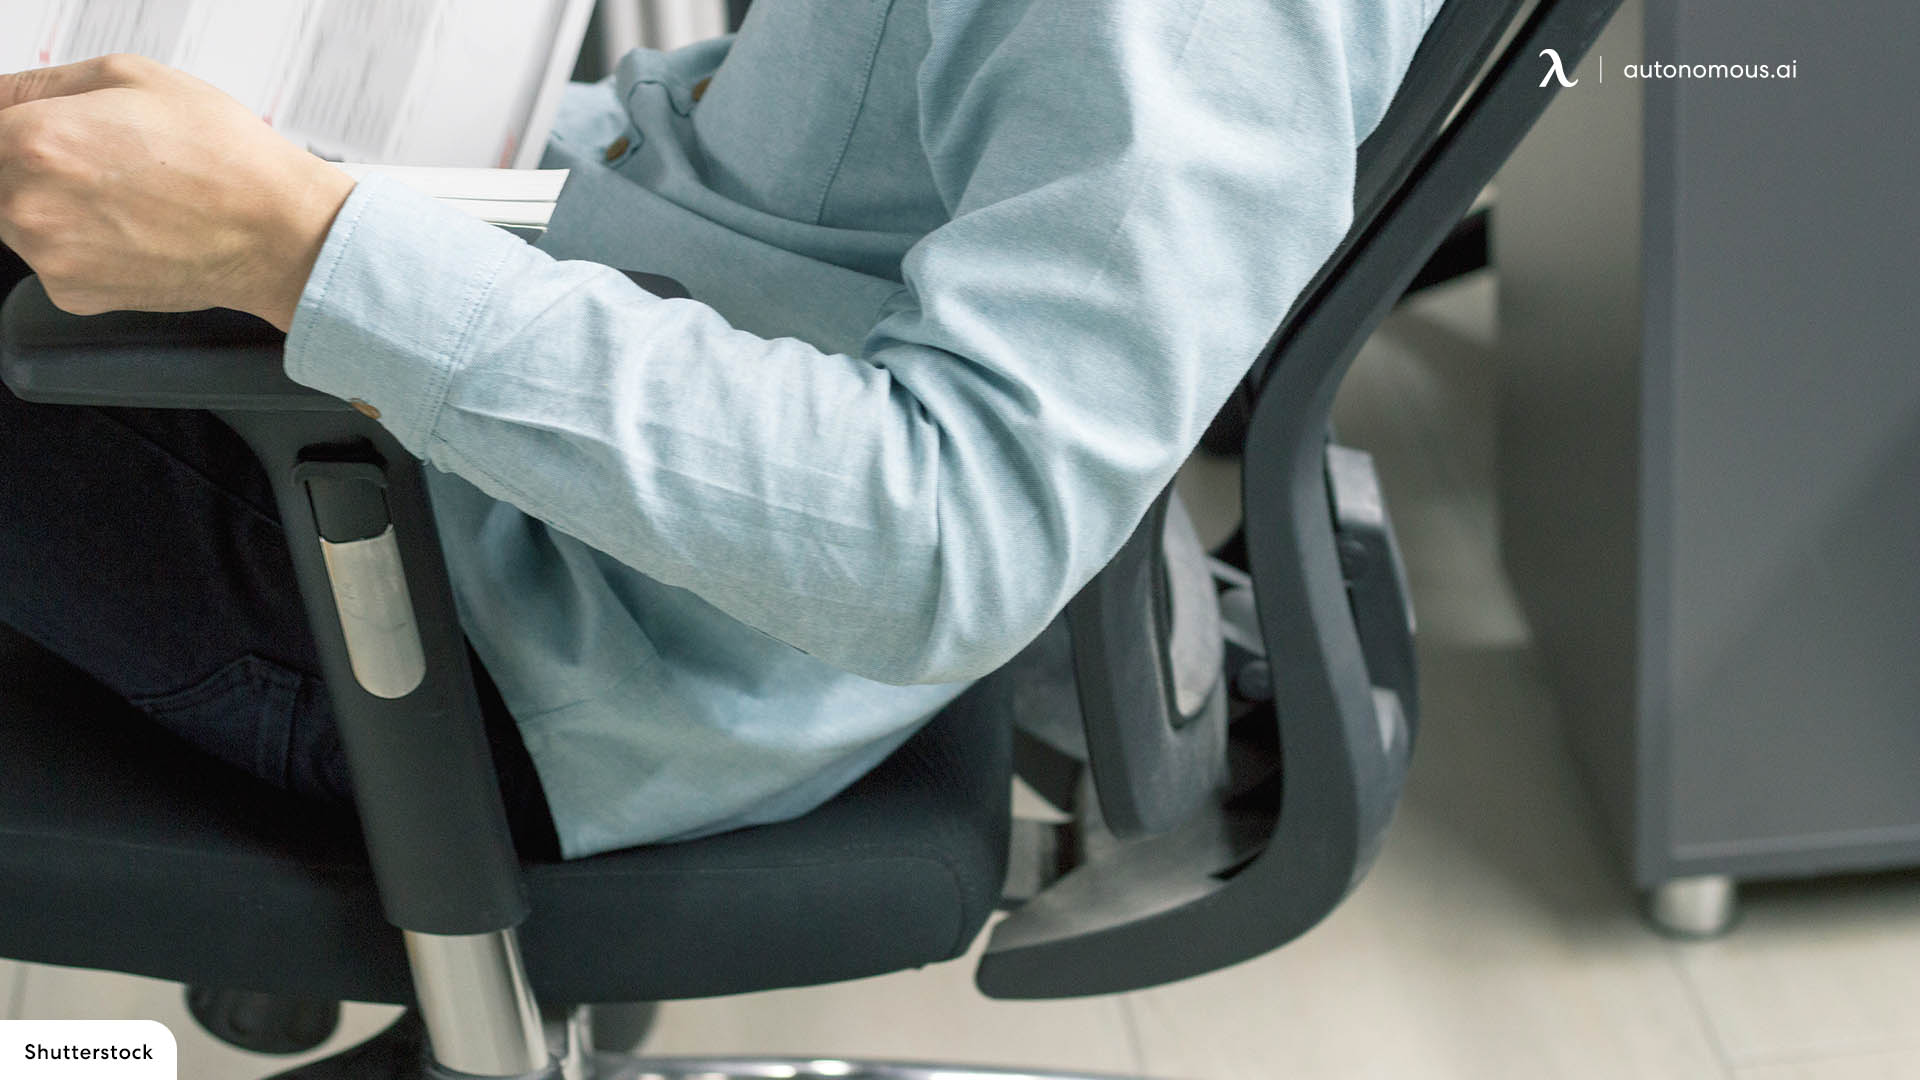 The 15 Best Lumbar Supports for an Office Chair (2022 Updated)